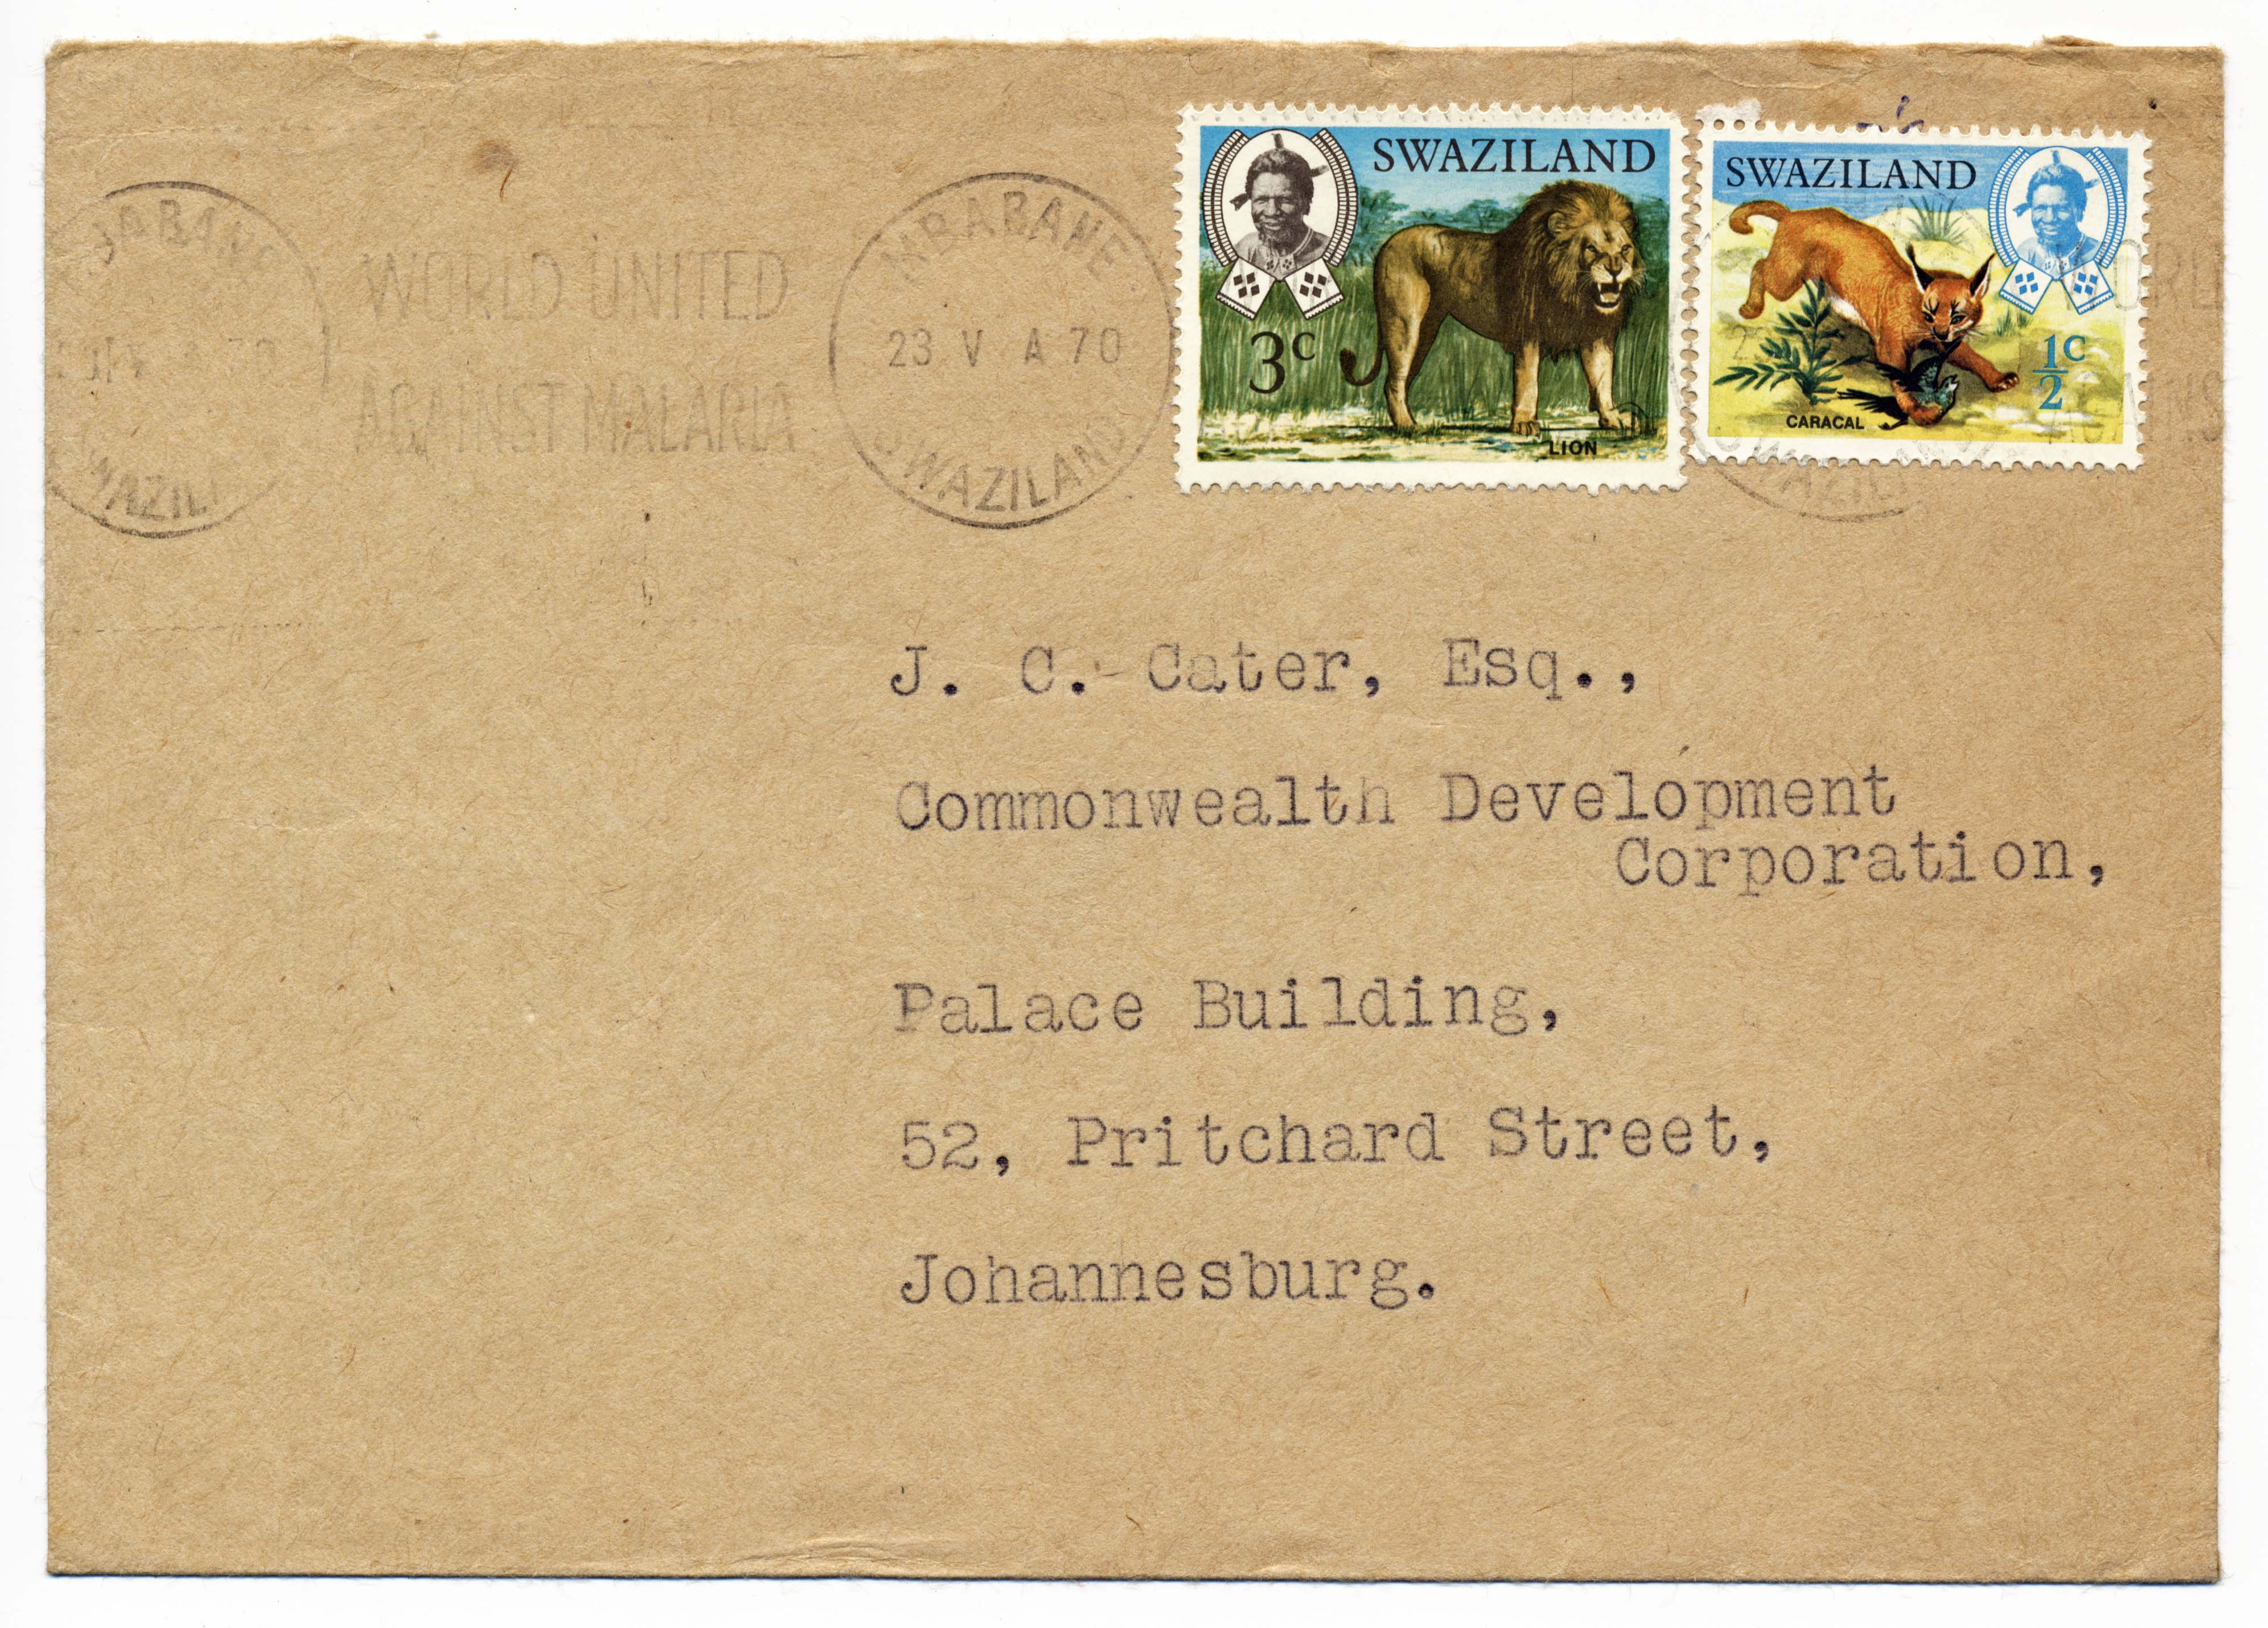 Swaziland 1970 Cover